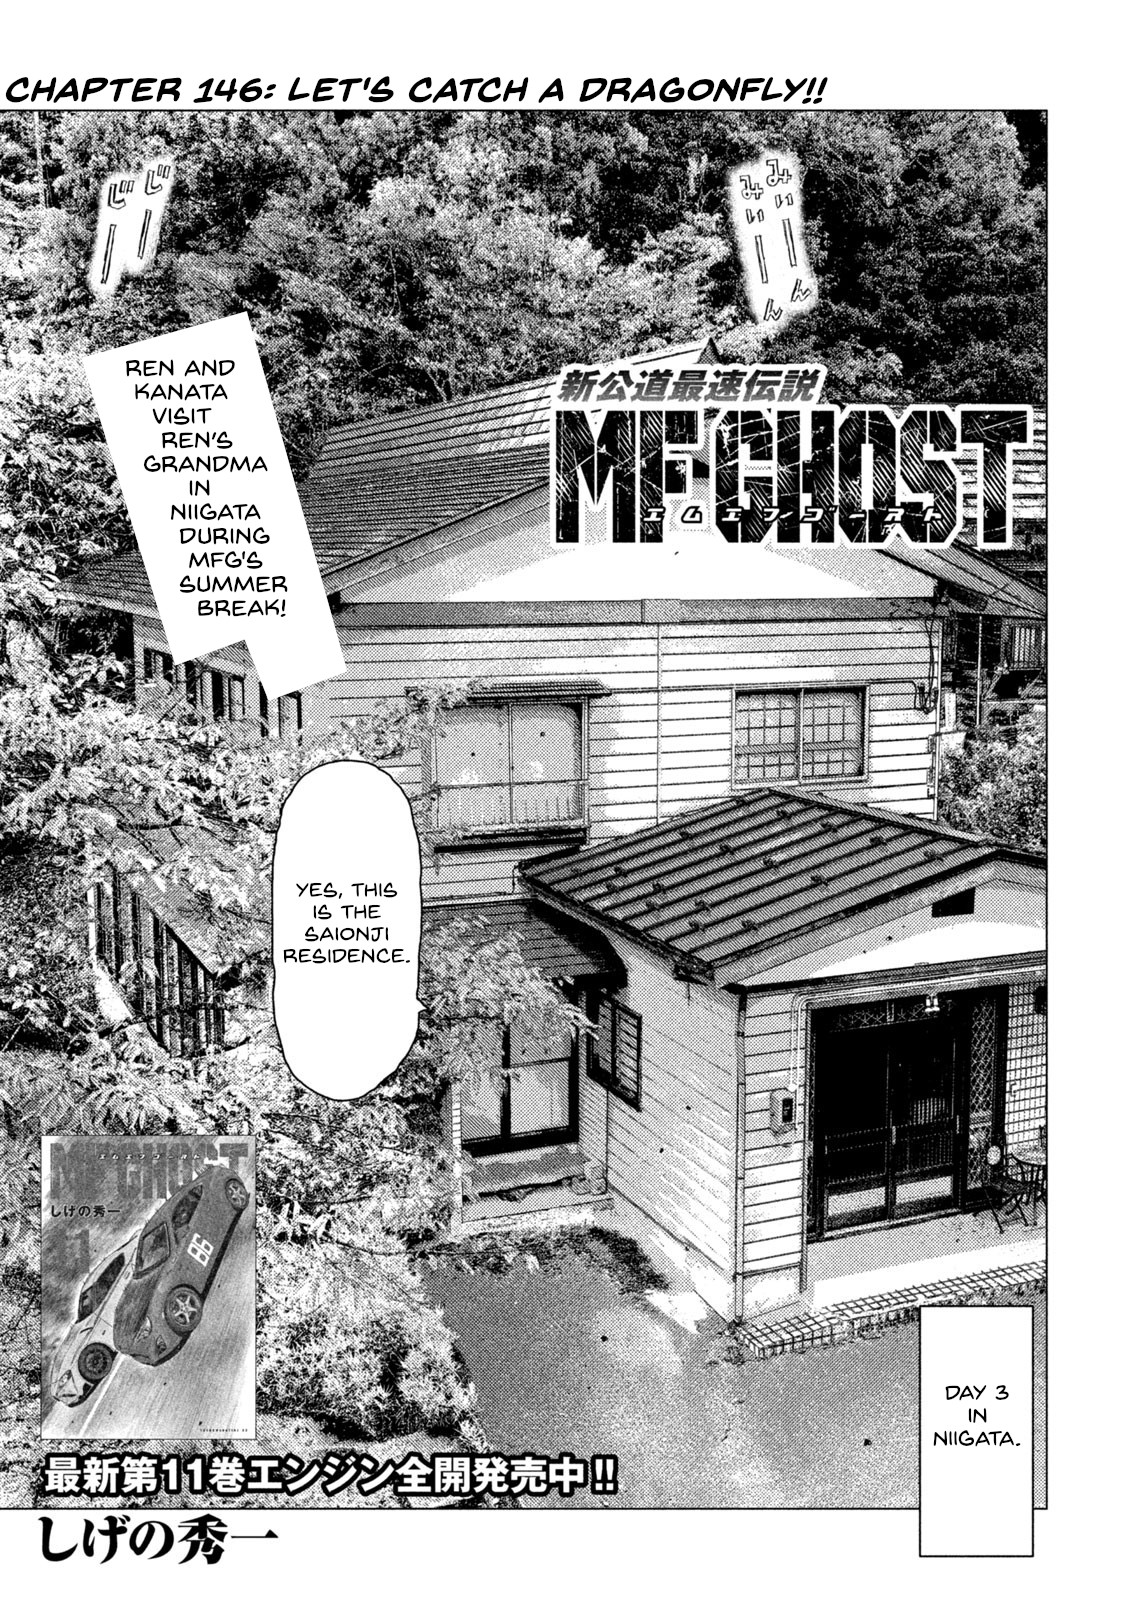 Mf Ghost Vol.13 Chapter 146